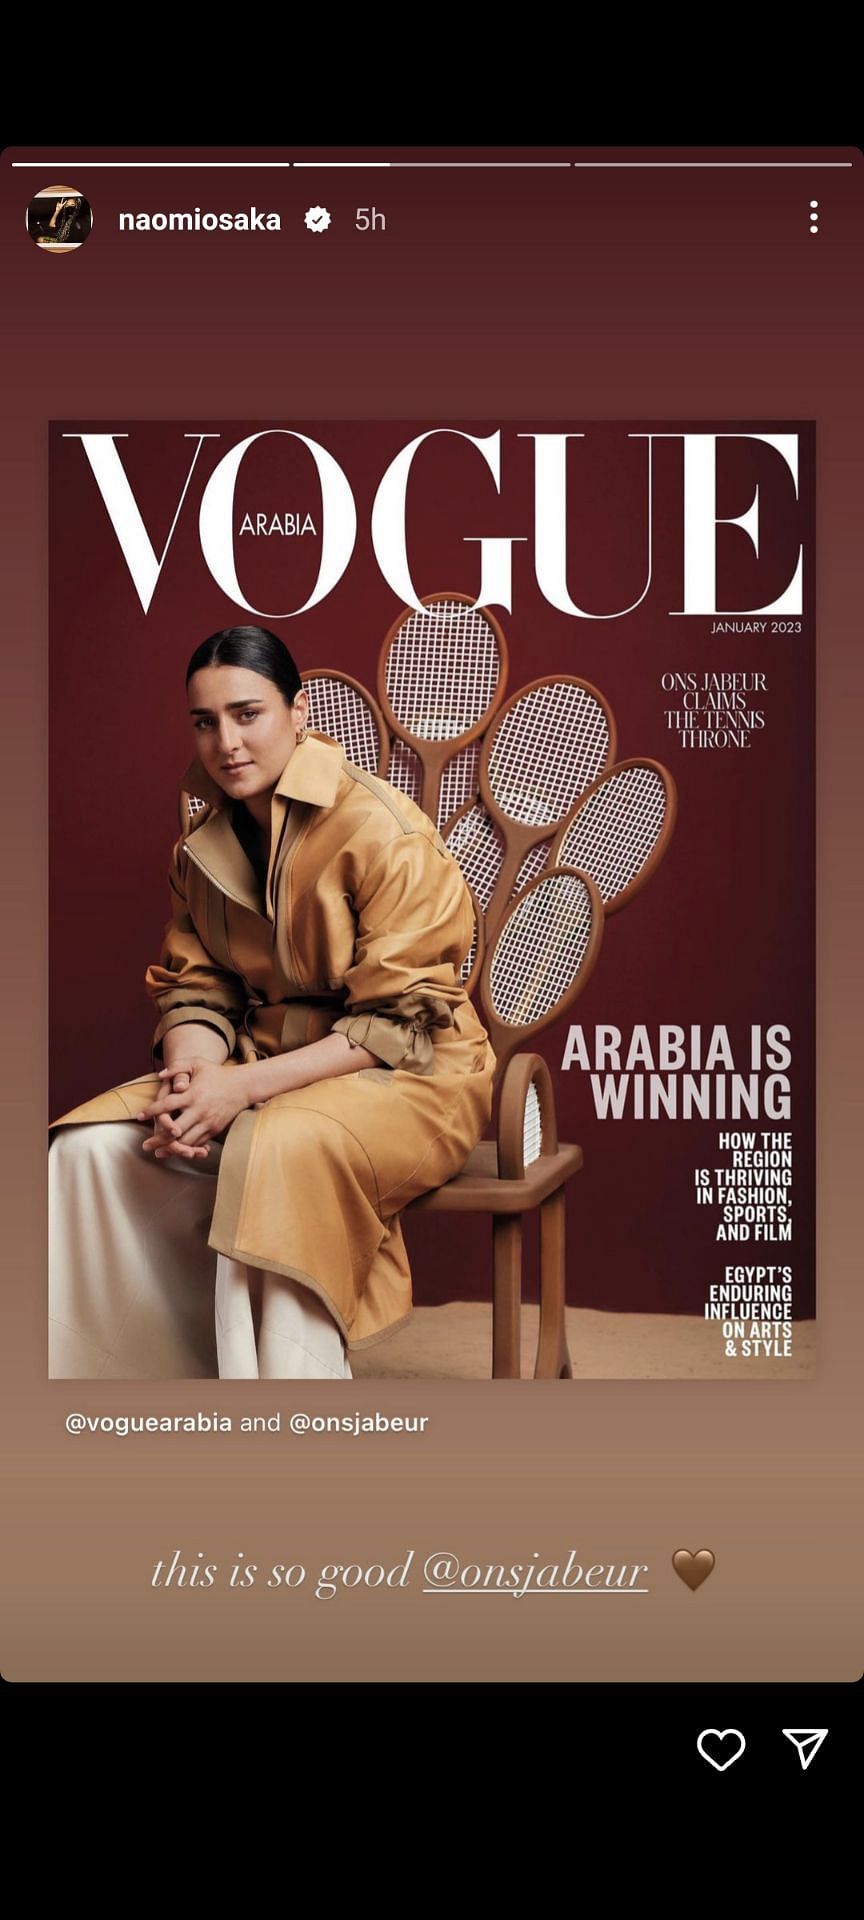 Naomi Osaka applauds Ons Jabeur featuring on the Vogue Arabia cover